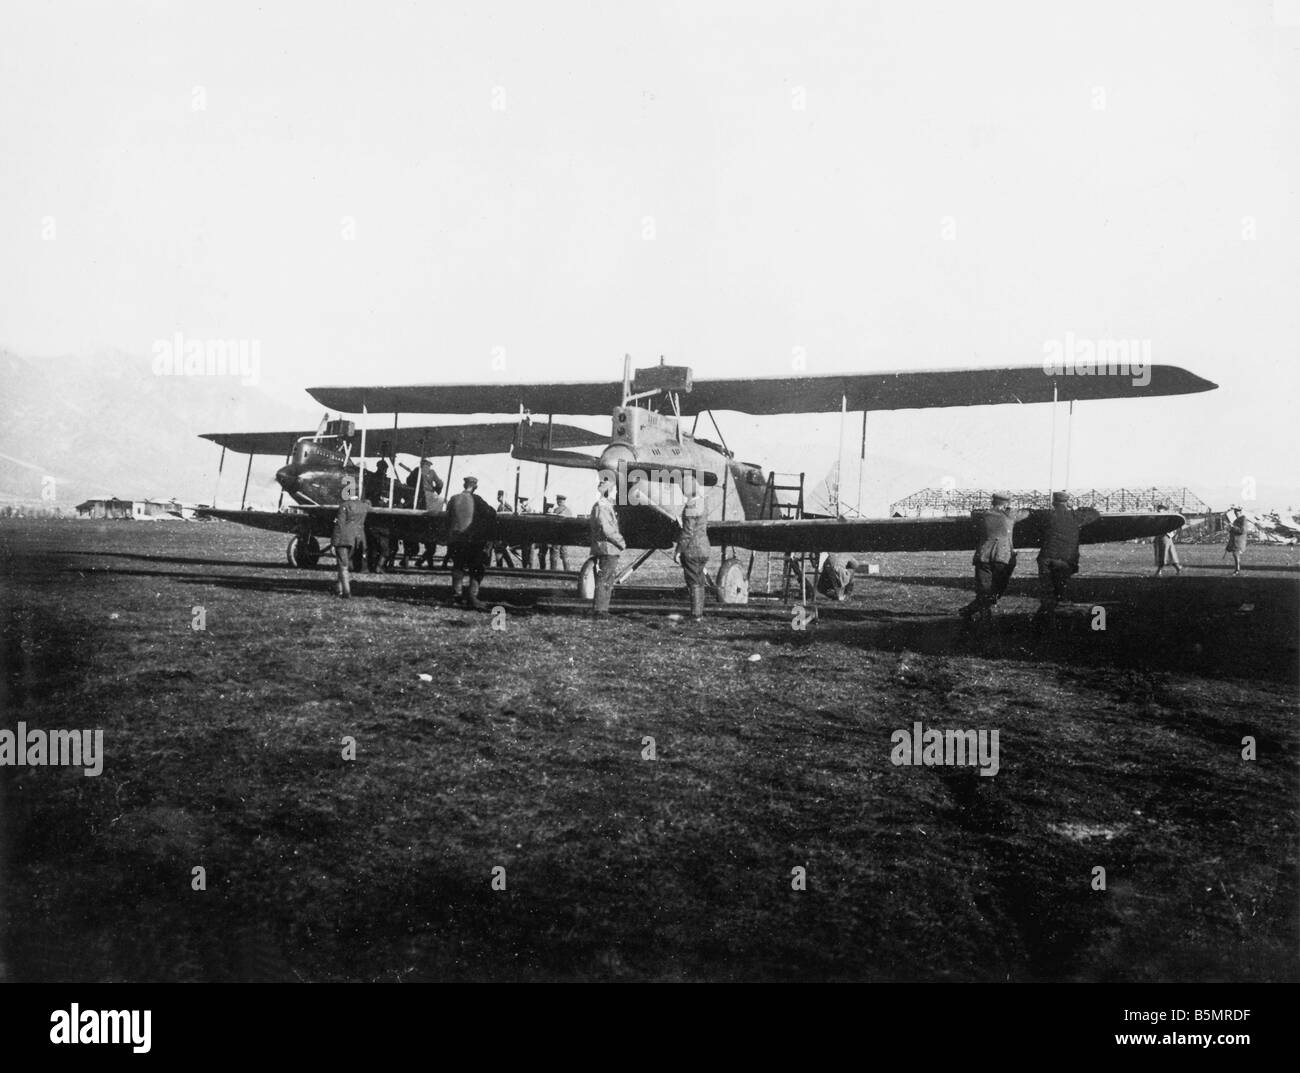 9 1917 11 13 A1 E German air force in Aviano 1917 First World War 1914 1918 German and Austrian relief attacks in Italy Isonco B Stock Photo